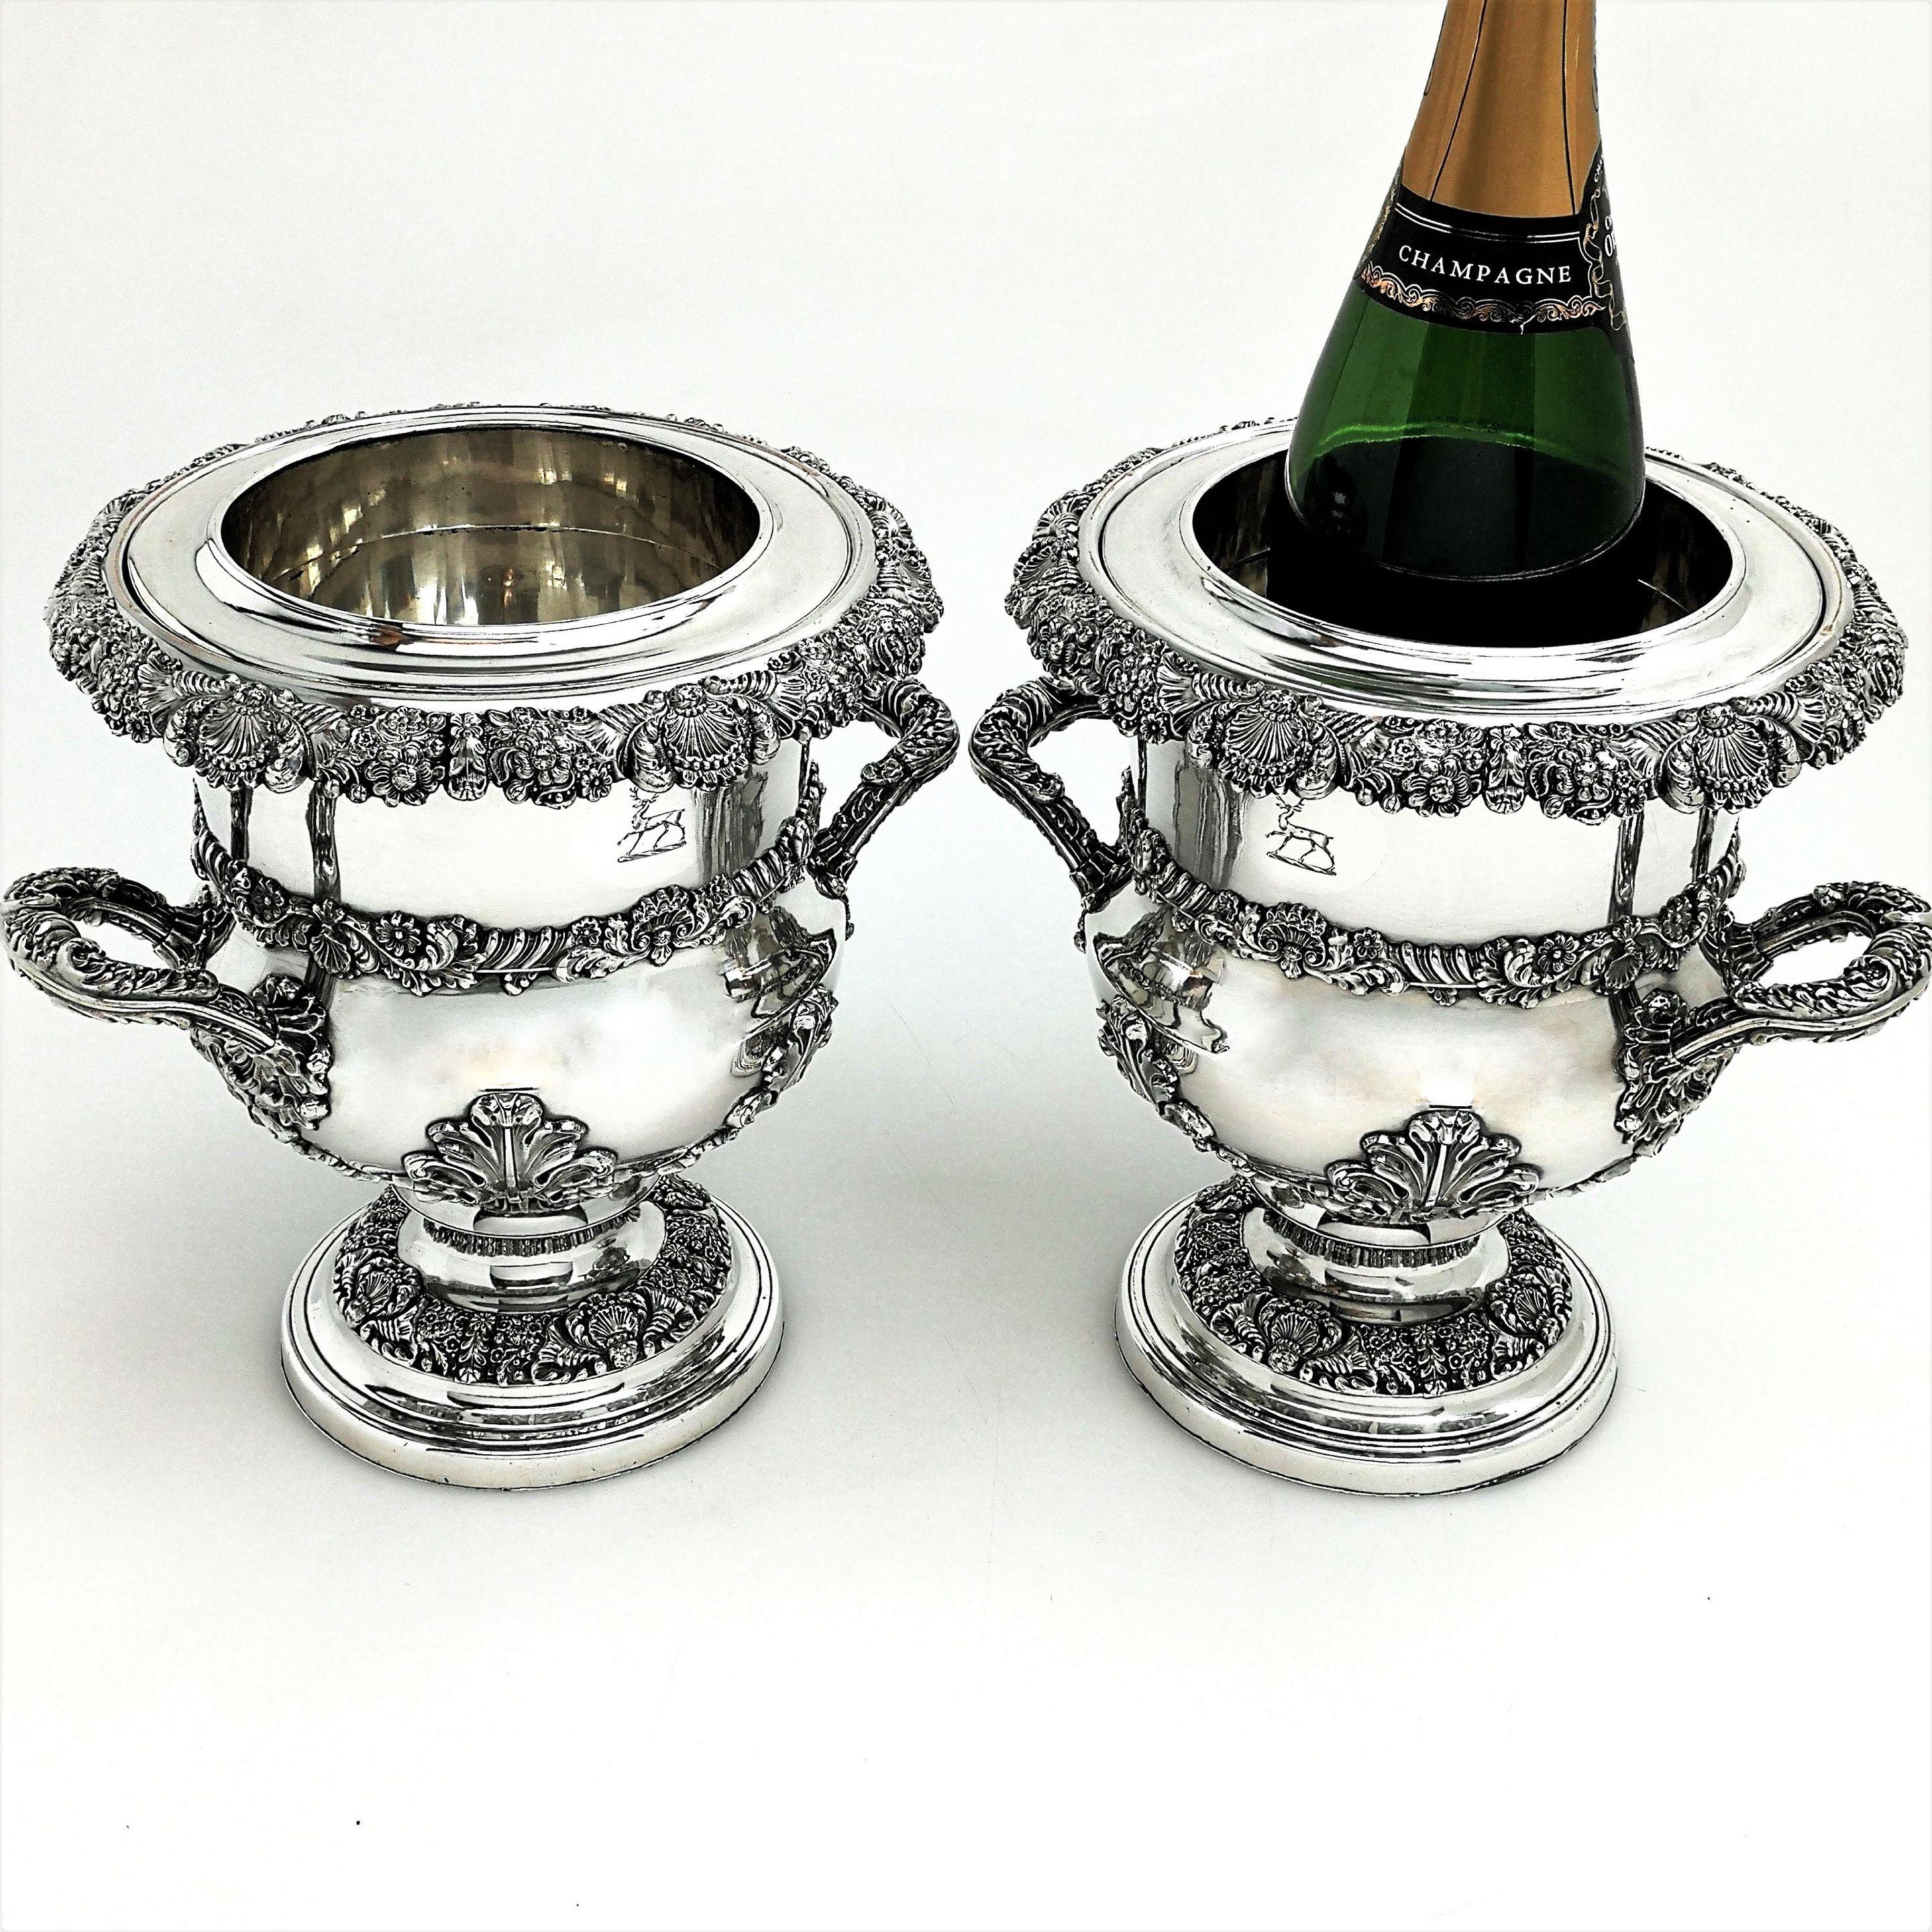 An impressive pair of antique Georgian old Sheffield silver plate wine coolers. These George IV Sheffield plated champagne coolers have ornate floral, shell and scroll bands and each has a pair of beautiful handles. The buckets each stand on a